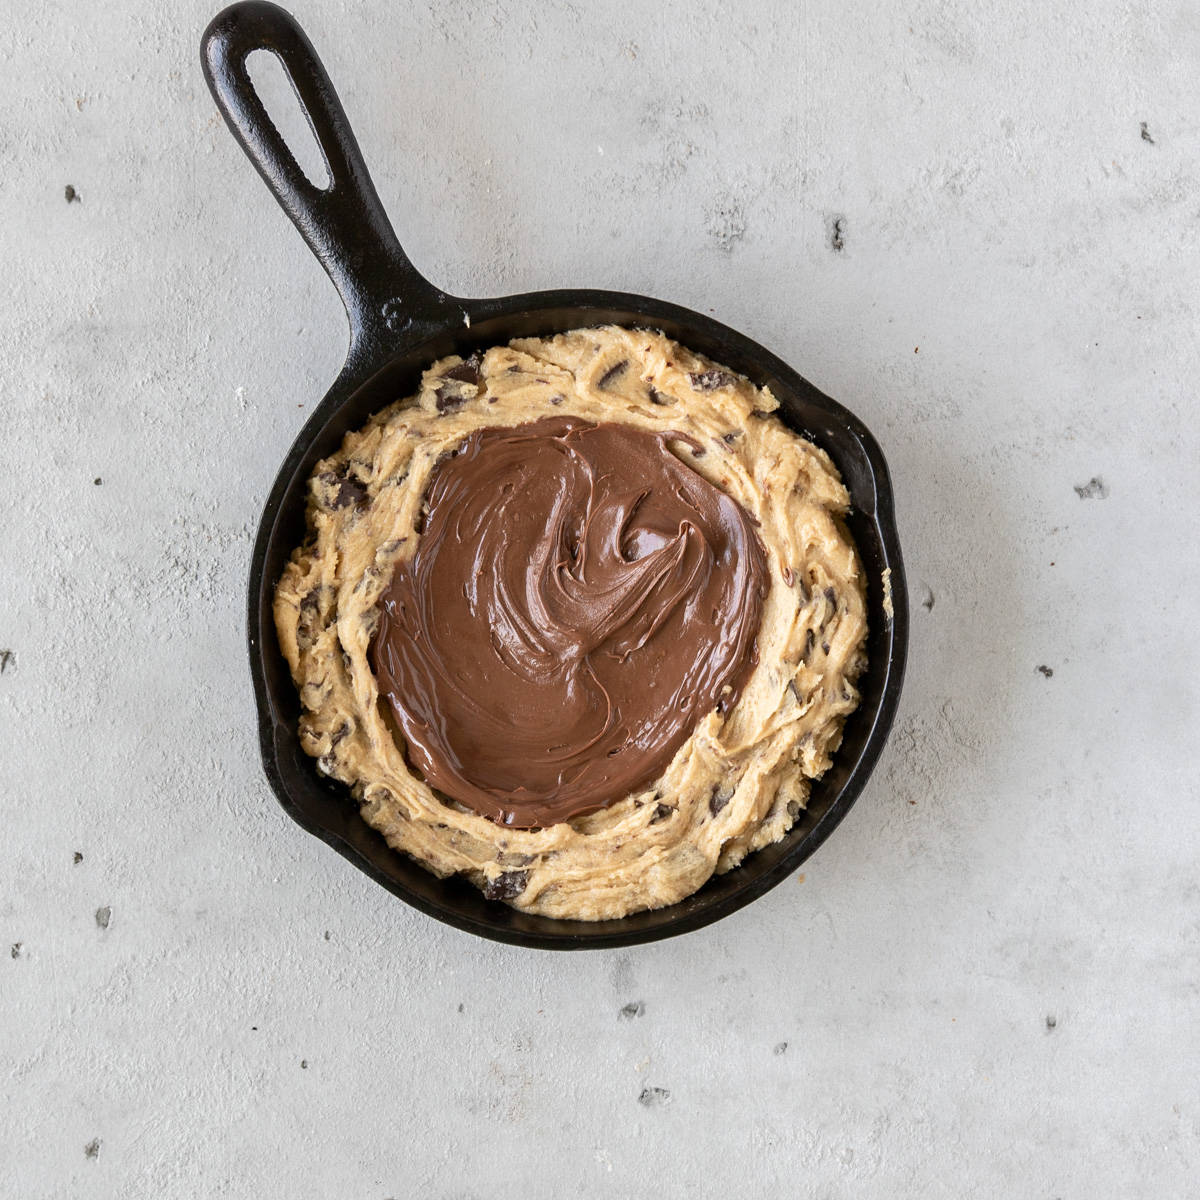 the cookie dough in a cast iron skillet with nutella spread on top of it.